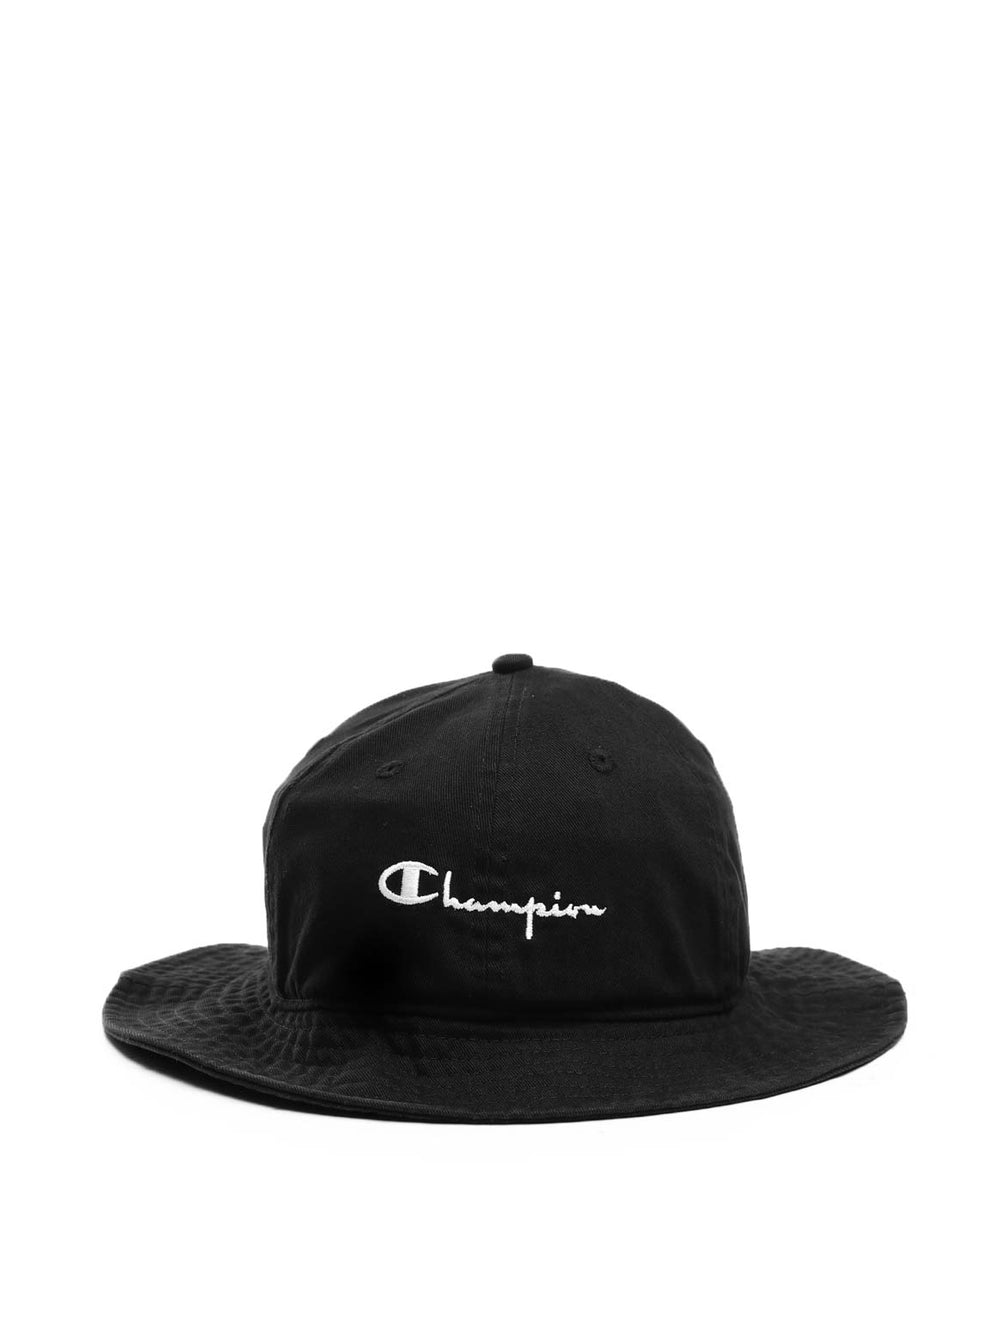 CHAMPION DOME BUCKET HAT - BLACK - CLEARANCE